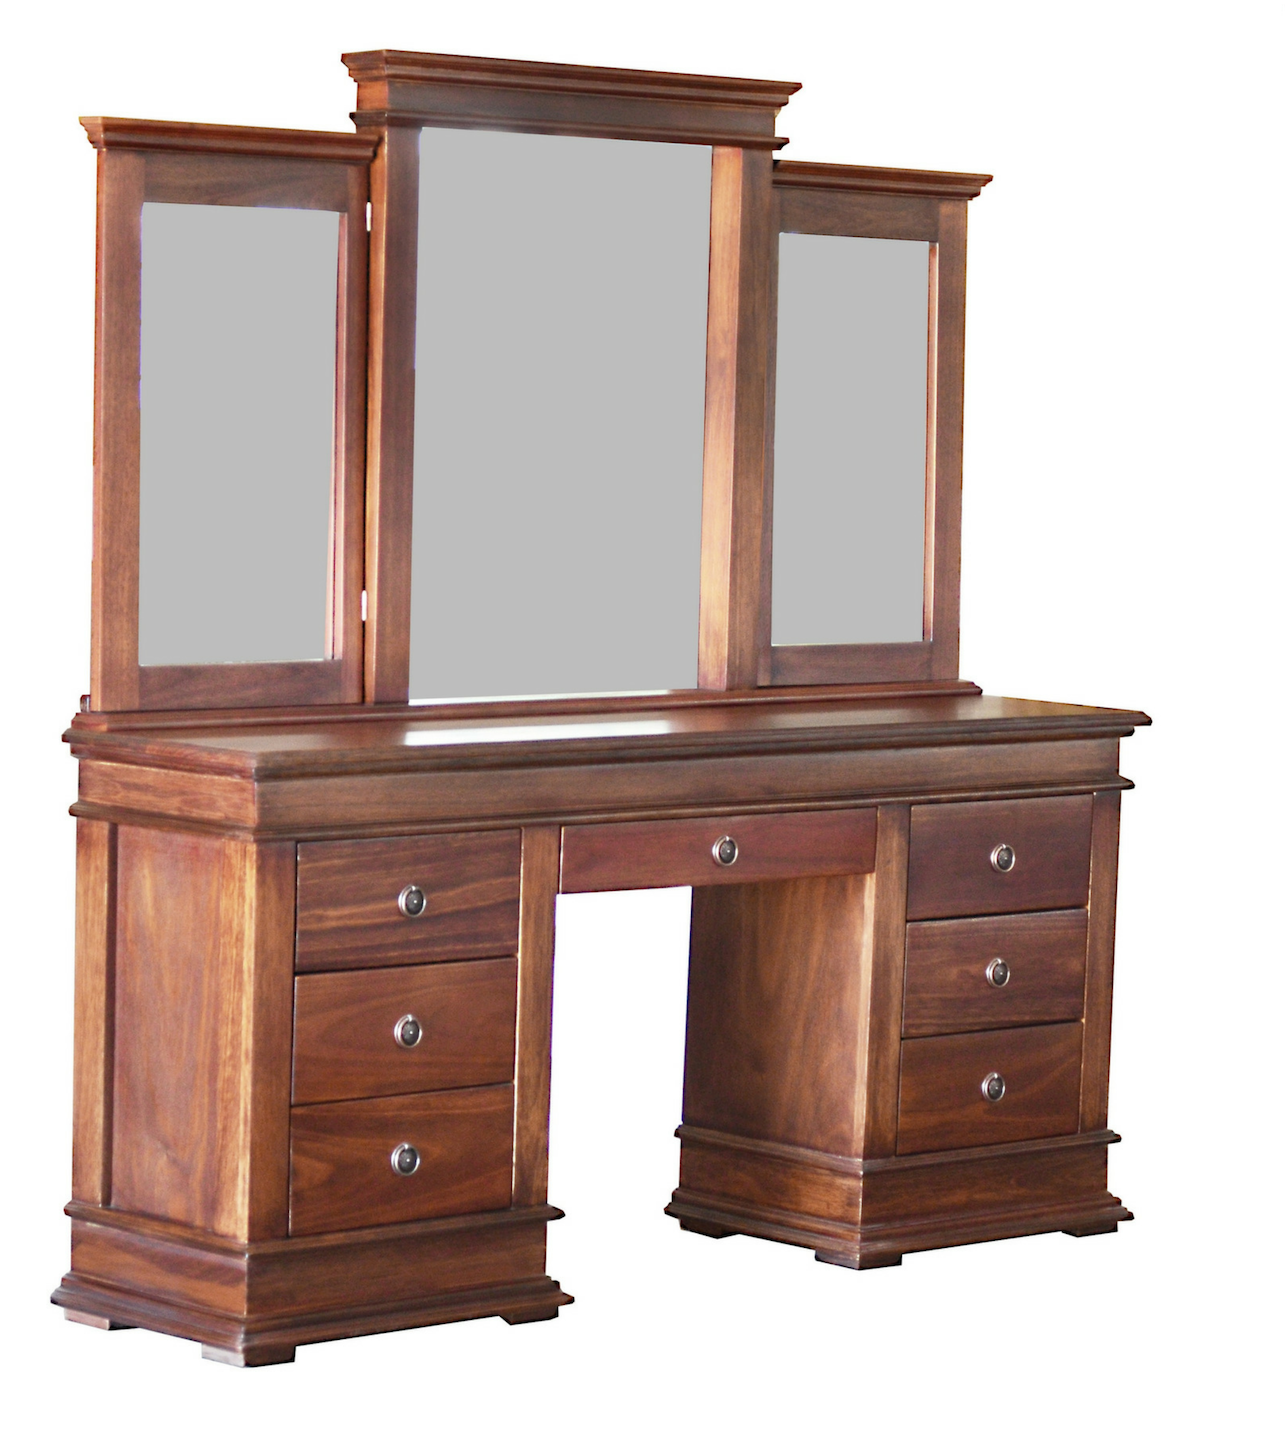 A Wooden Vanity With Three Mirrors